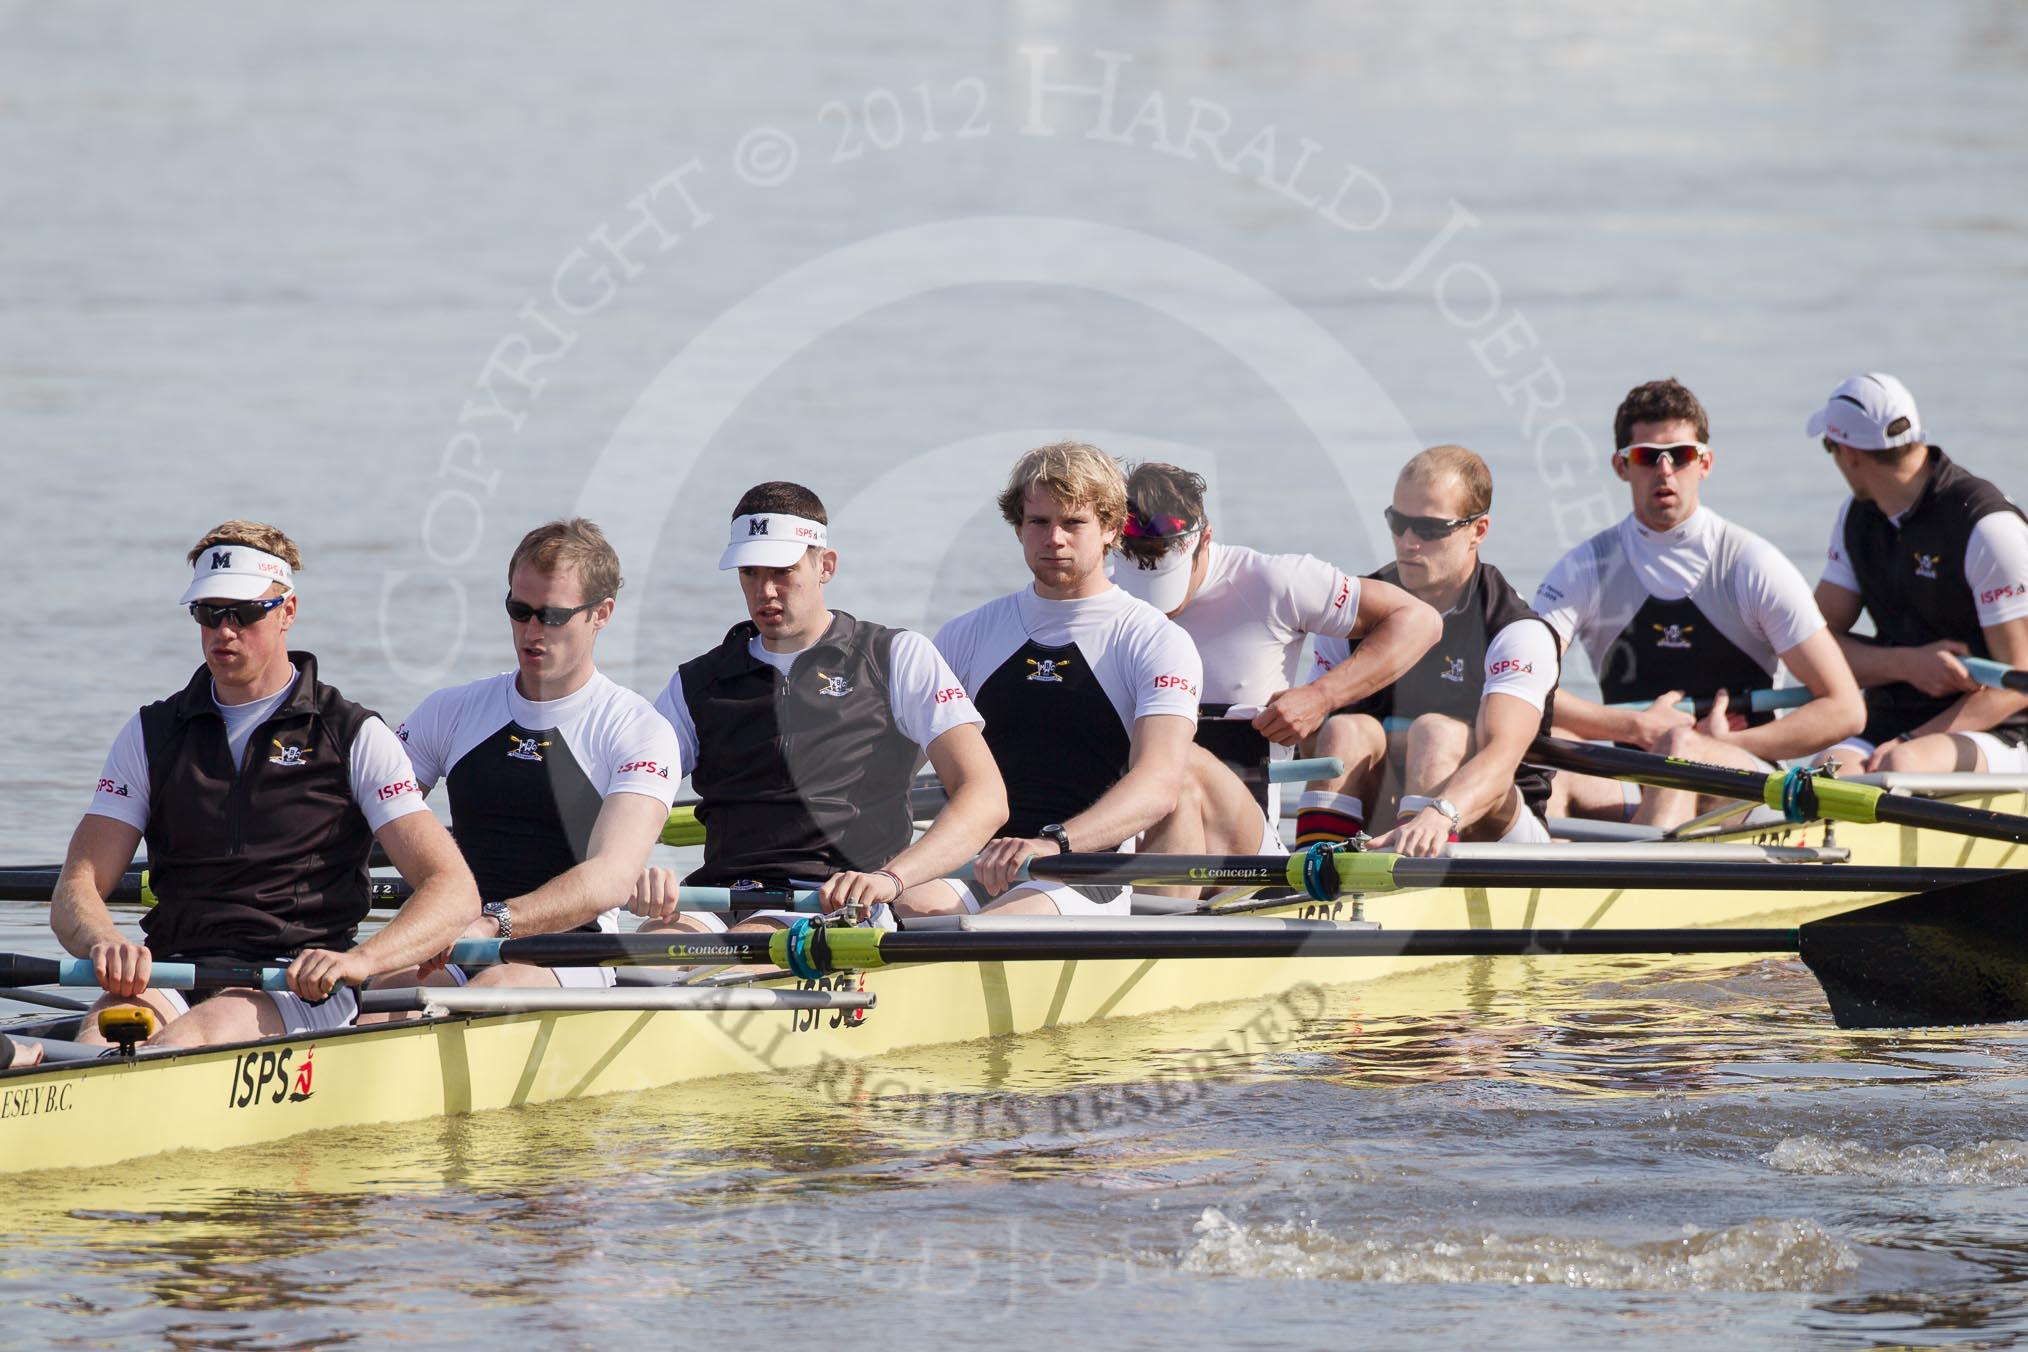 The Boat Race season 2012 - fixture CUBC vs Molesey BC.




on 25 March 2012 at 14:40, image #16